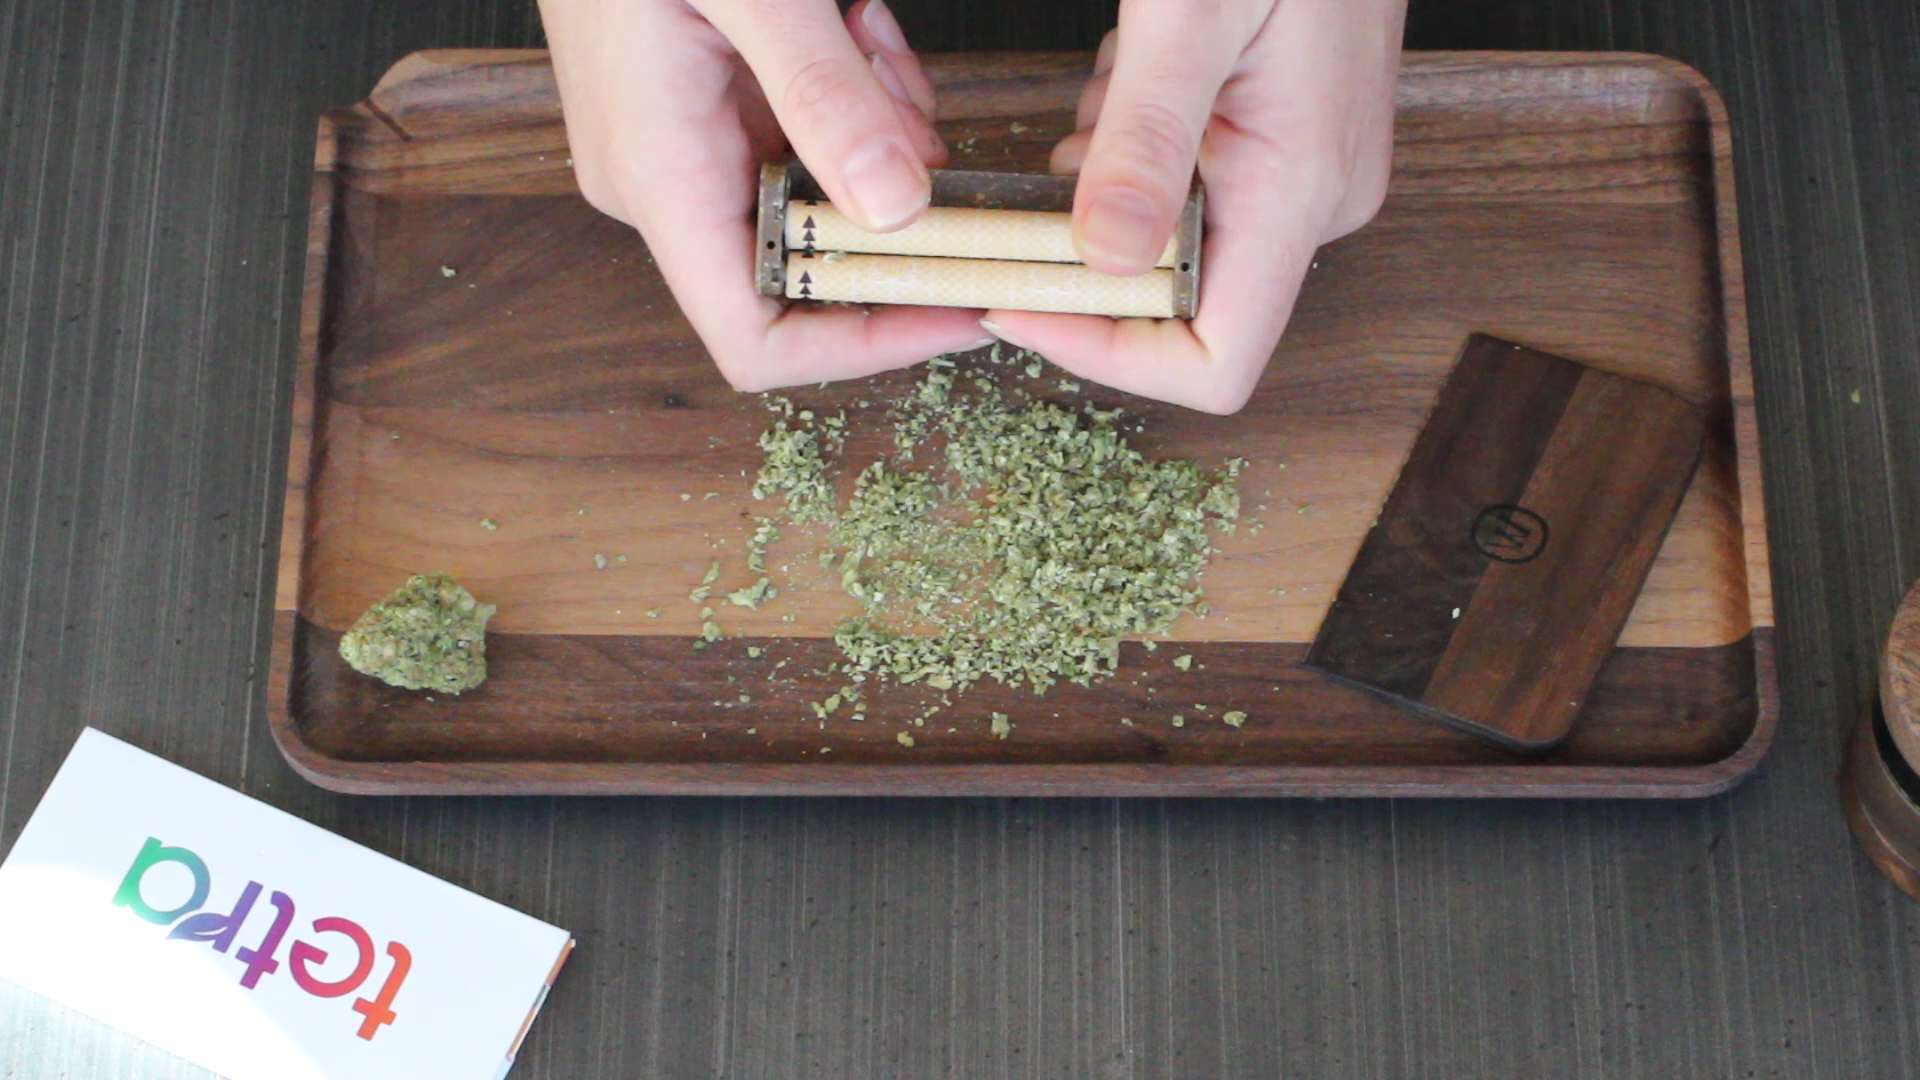 joint rolling techniques